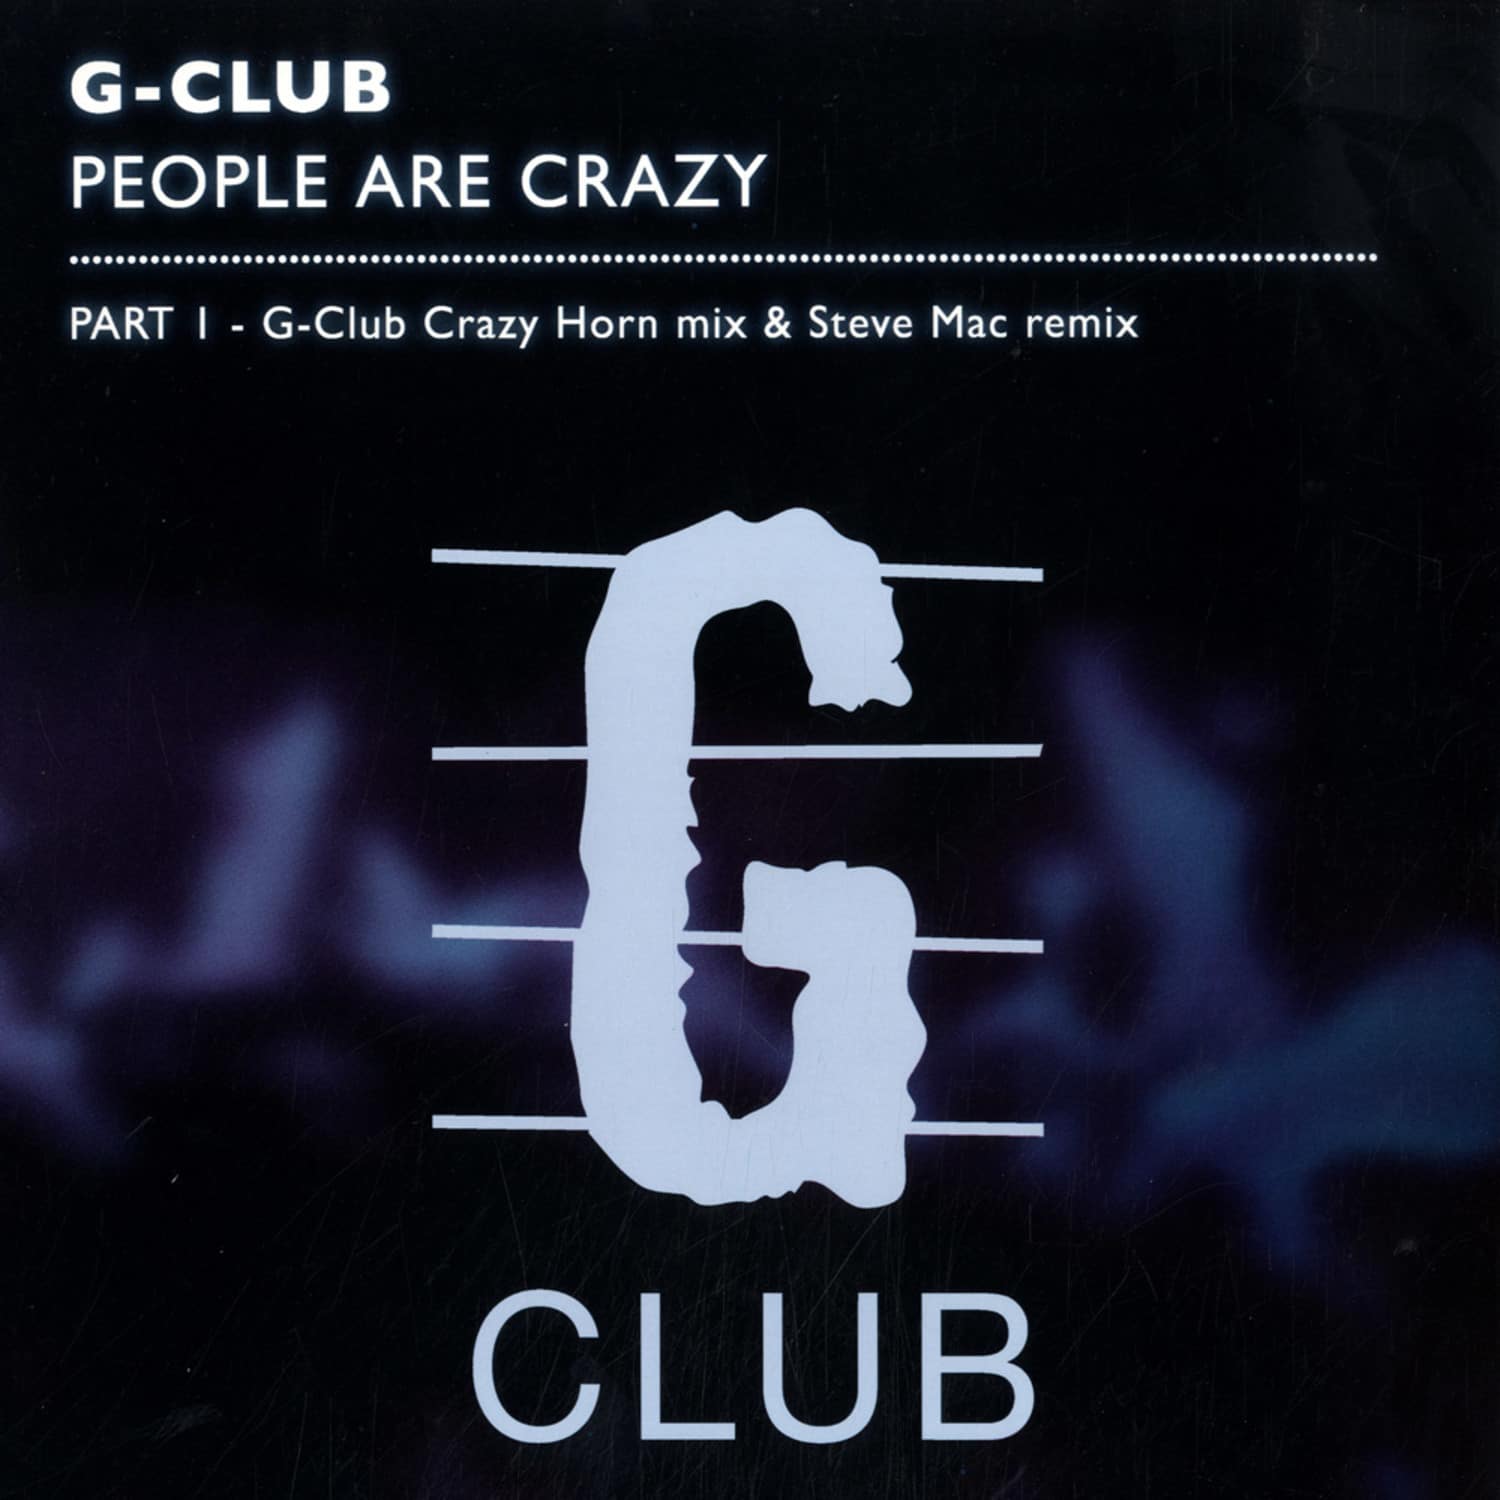 G-club - PEOPLE ARE CRAZY